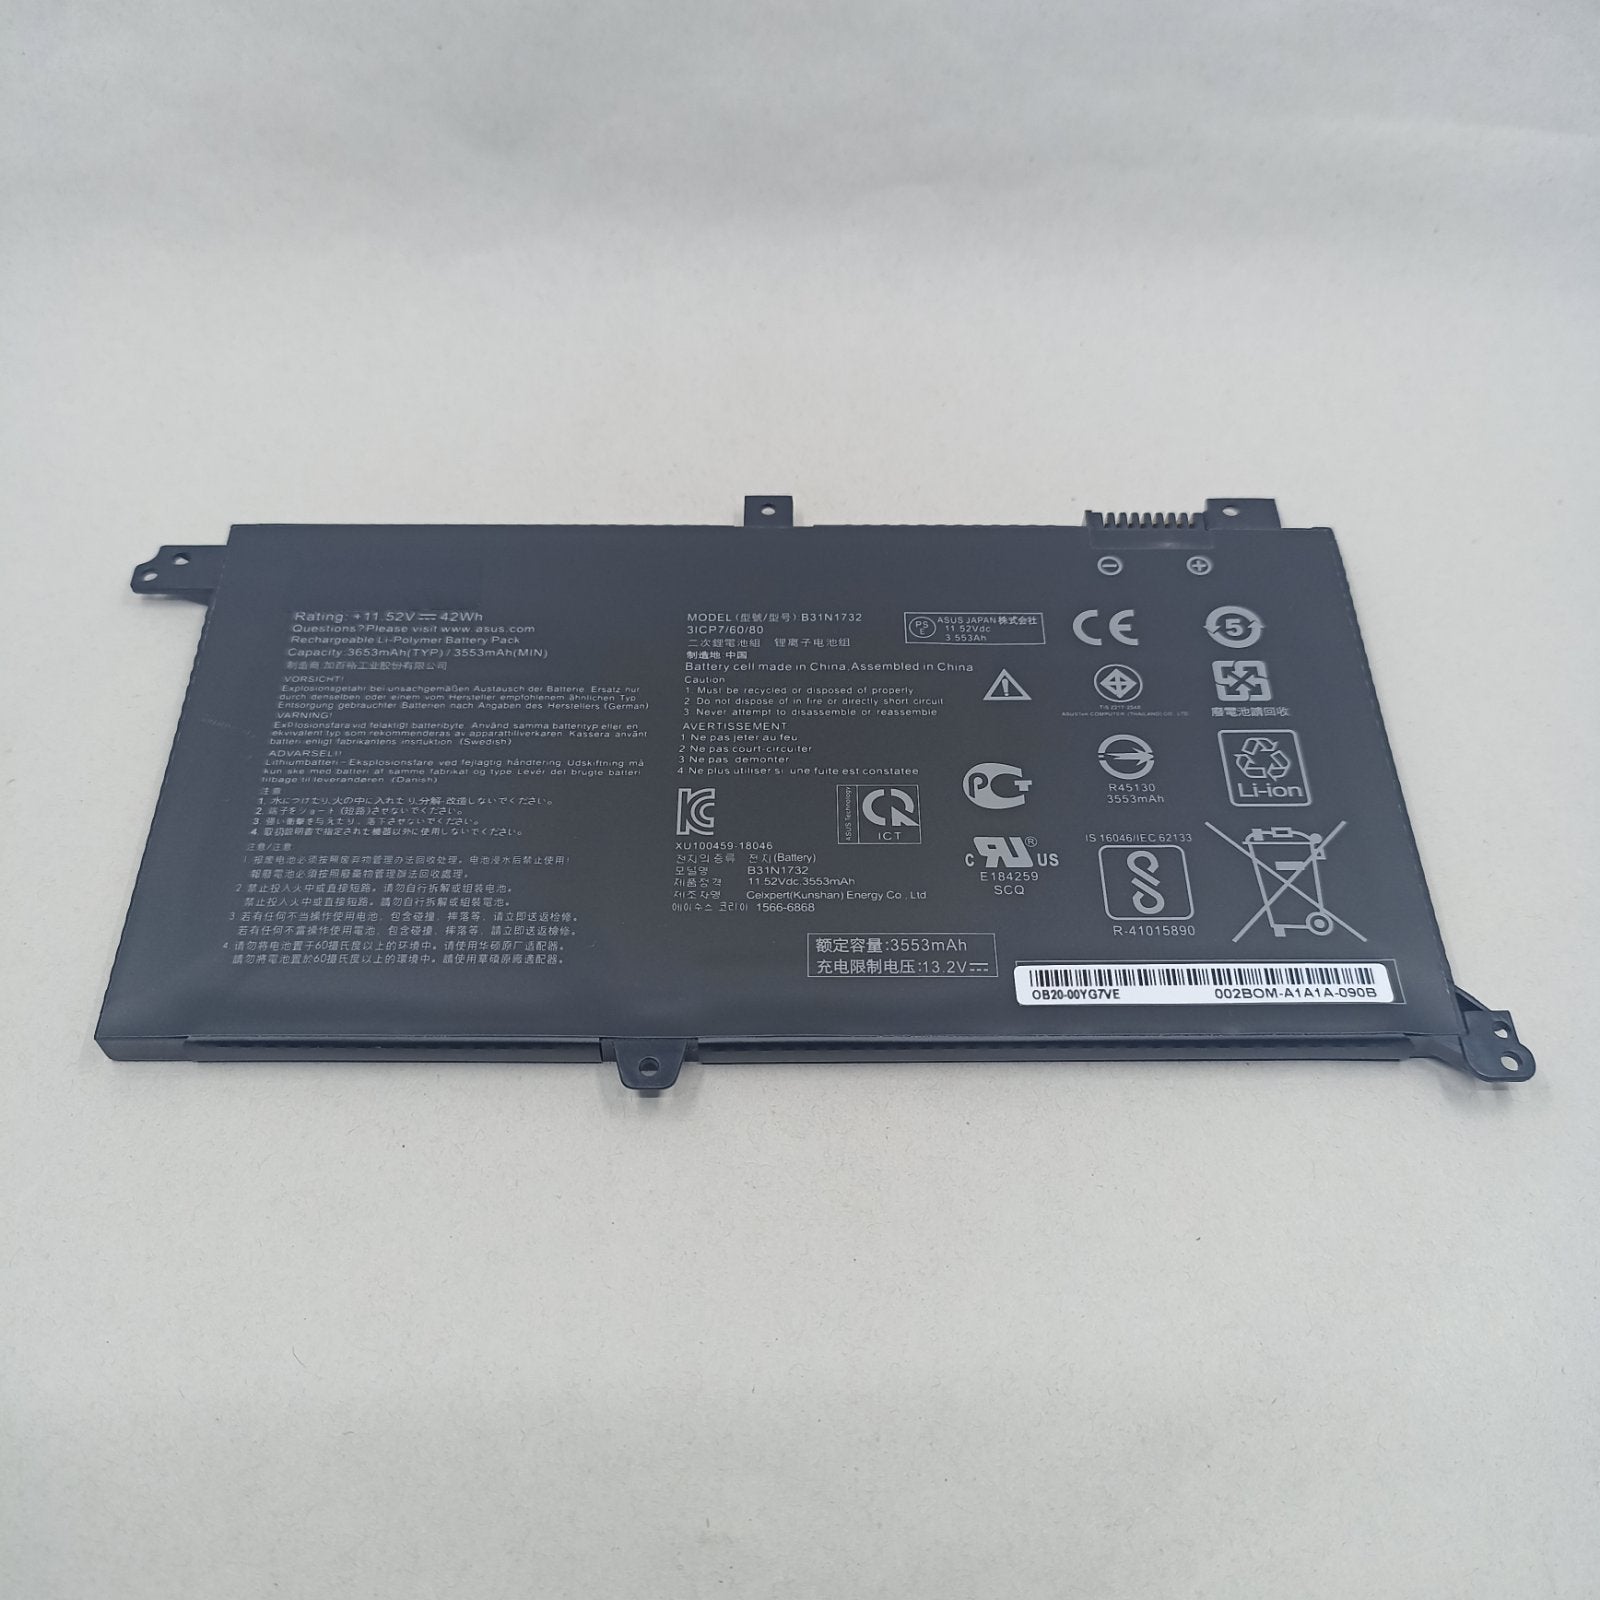 Replacement Battery for Asus S430UN A1